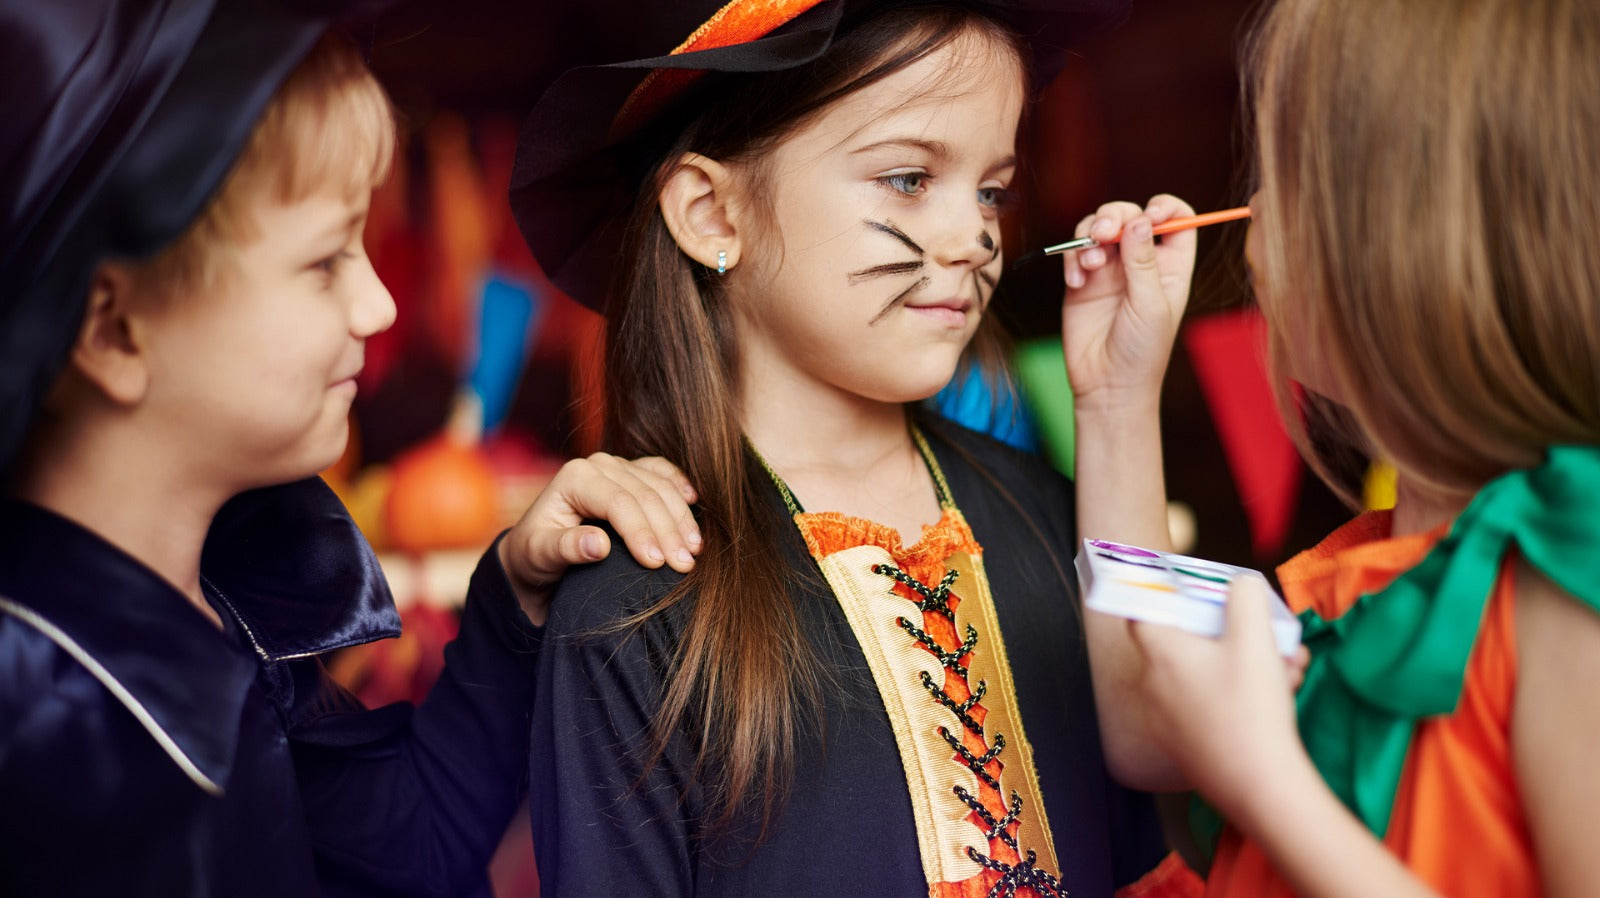 The dangers of face paint: what you need to know before Halloween